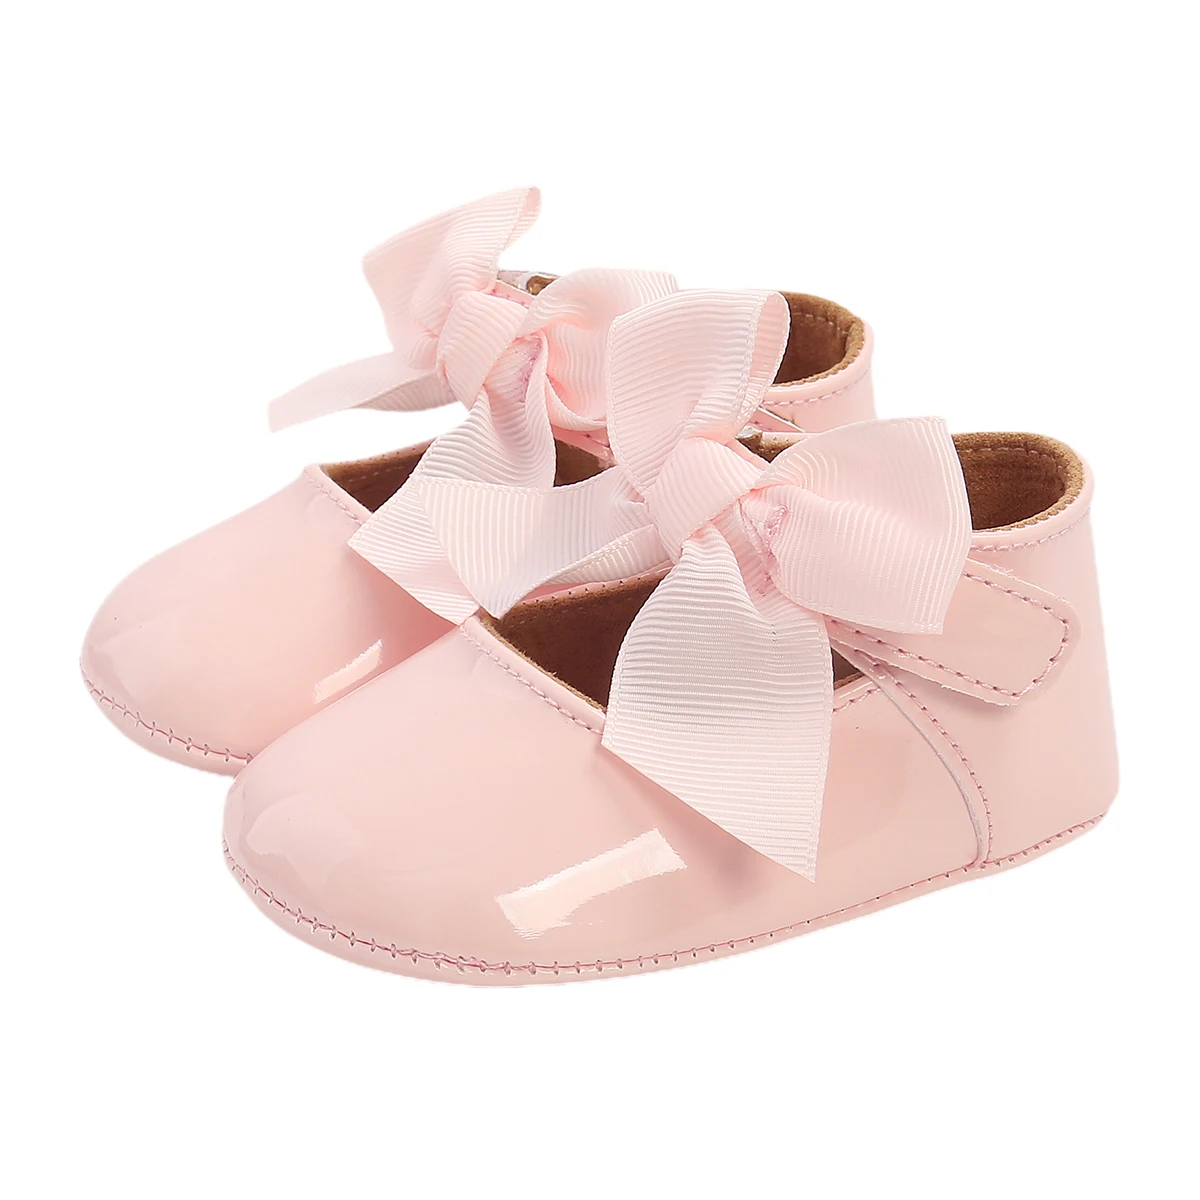 

0-18M Baby Girls Solid First Walker Shoes Infant Newborn Soft Sole Bow Knot Princess Dress Mary Jane Flats Prewalker Shoes